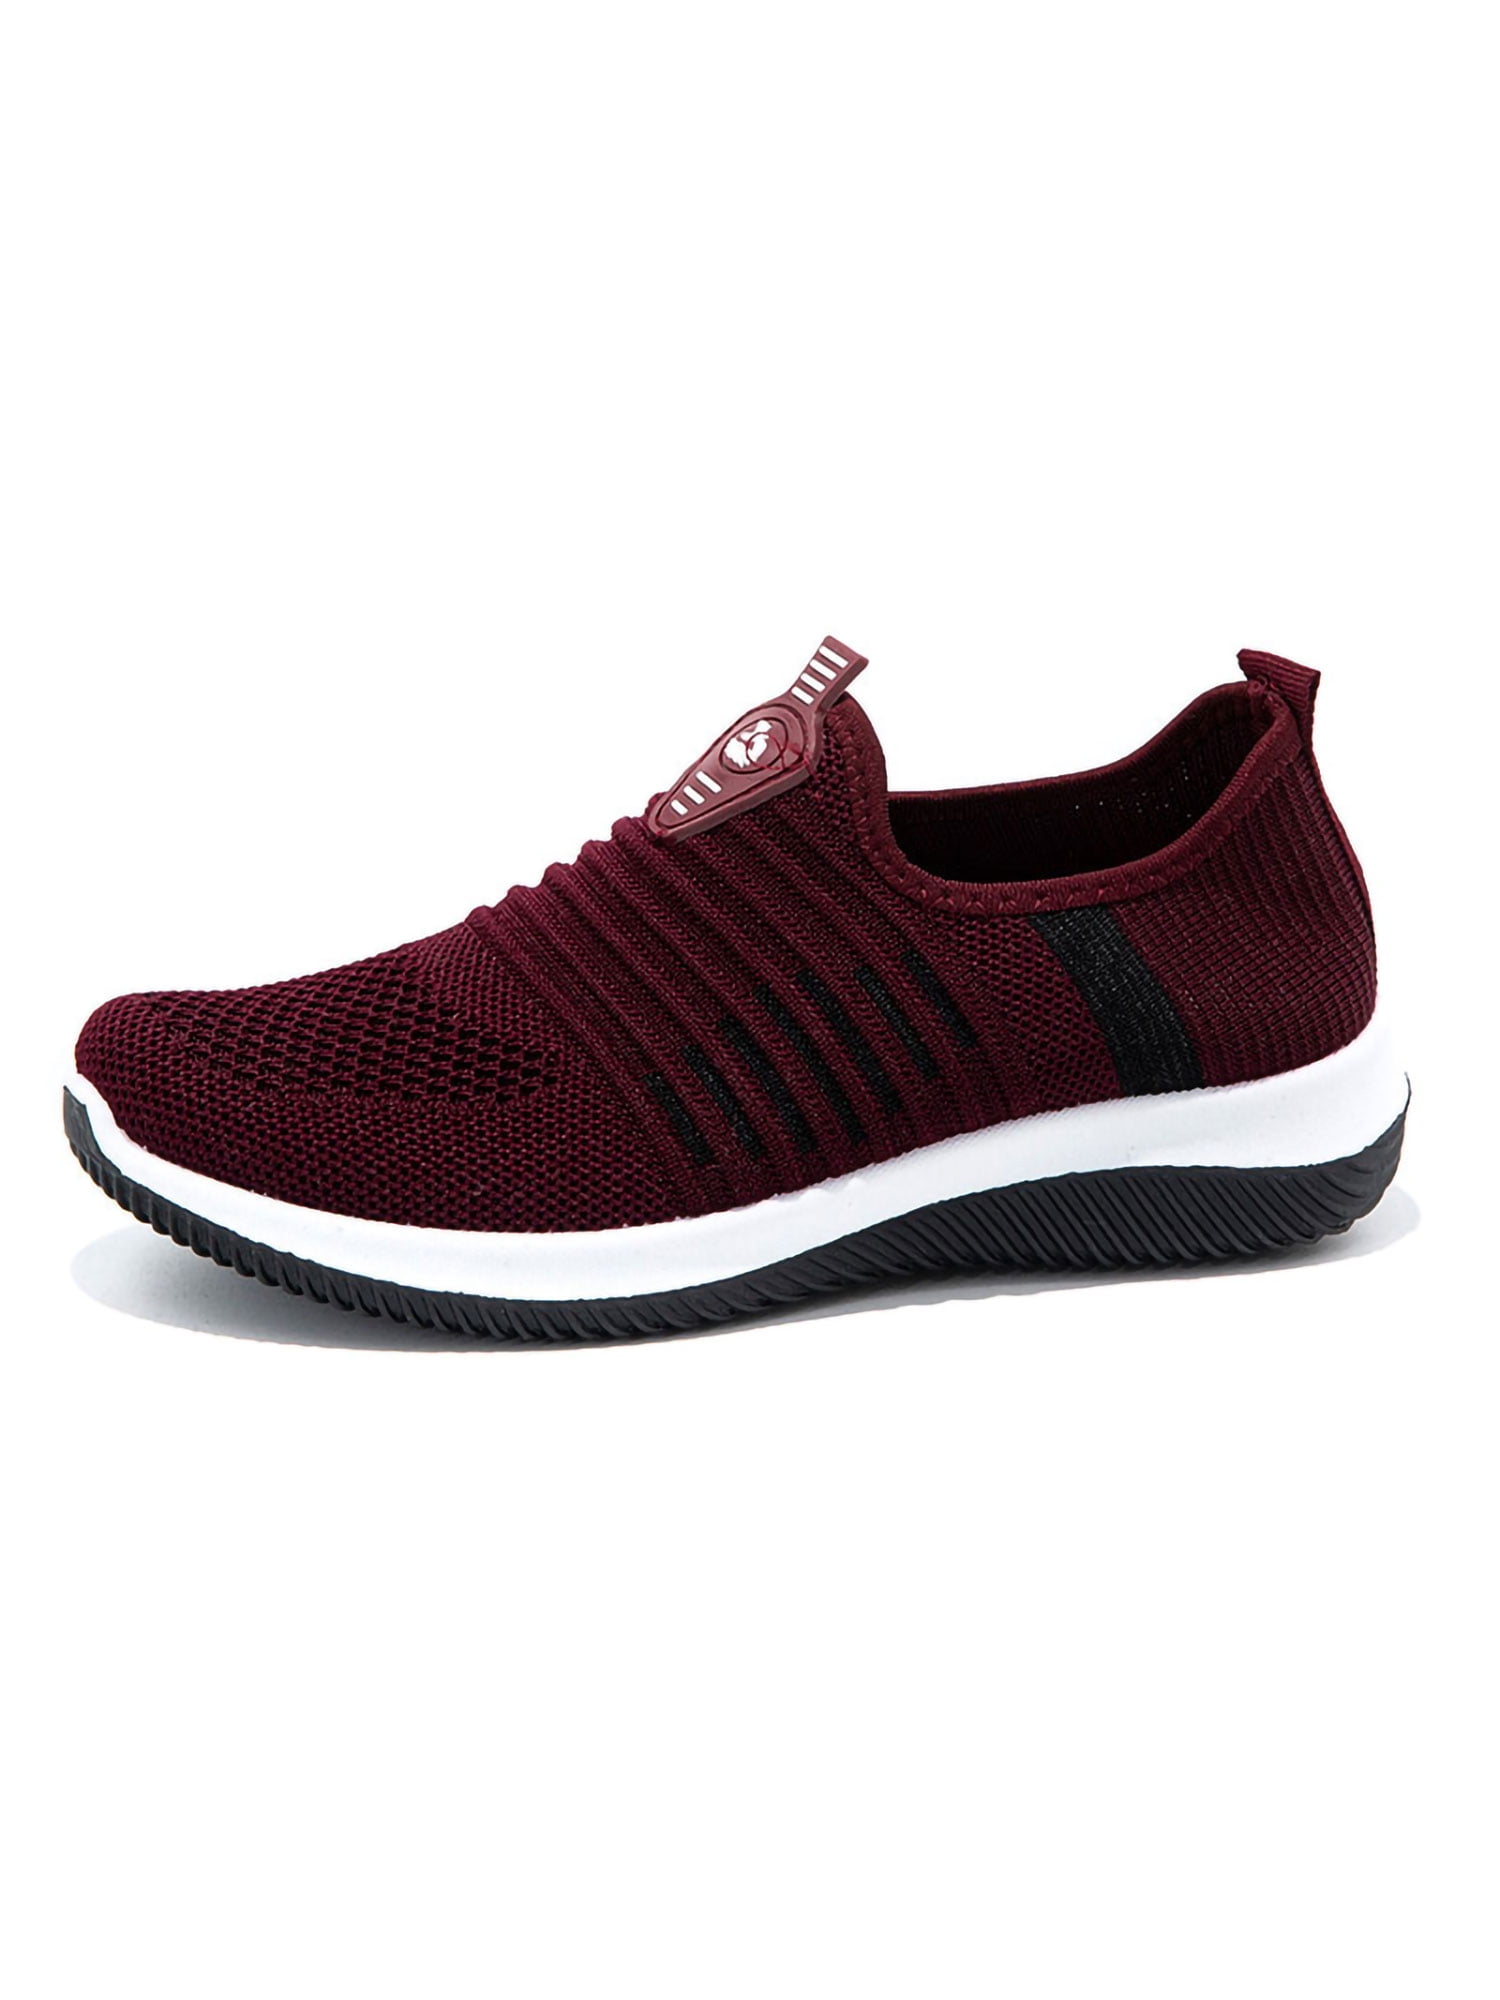 Womens Slip on Sneakers Ultra Lightweight Breathable Fashion Sports Gym Jogging Athletic Walking Shoes 